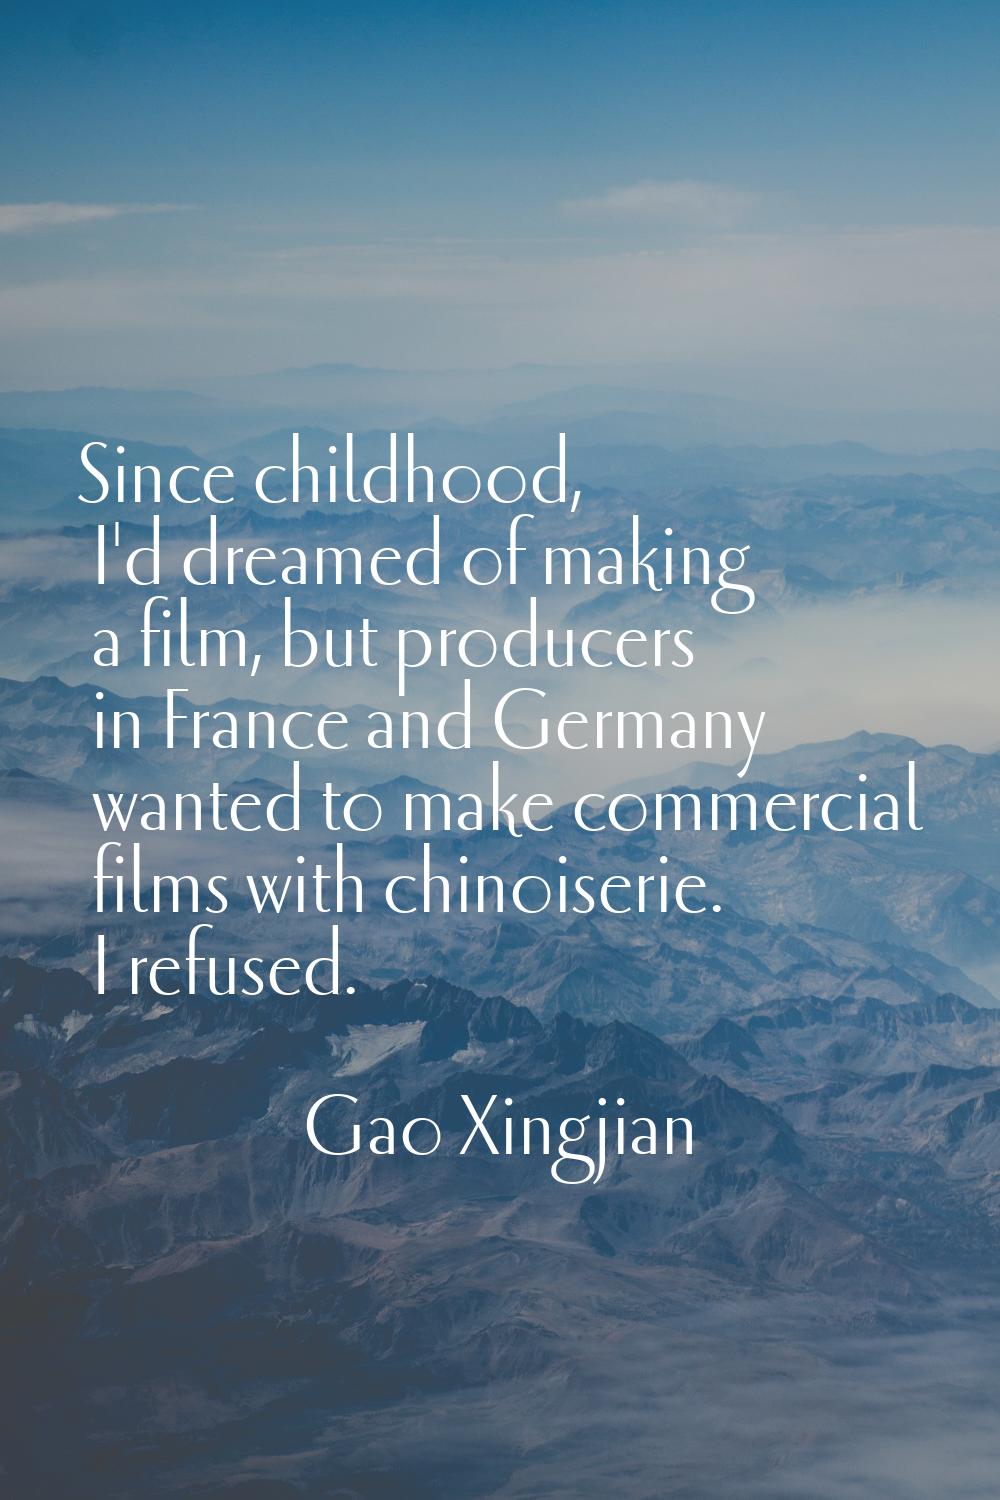 Since childhood, I'd dreamed of making a film, but producers in France and Germany wanted to make c